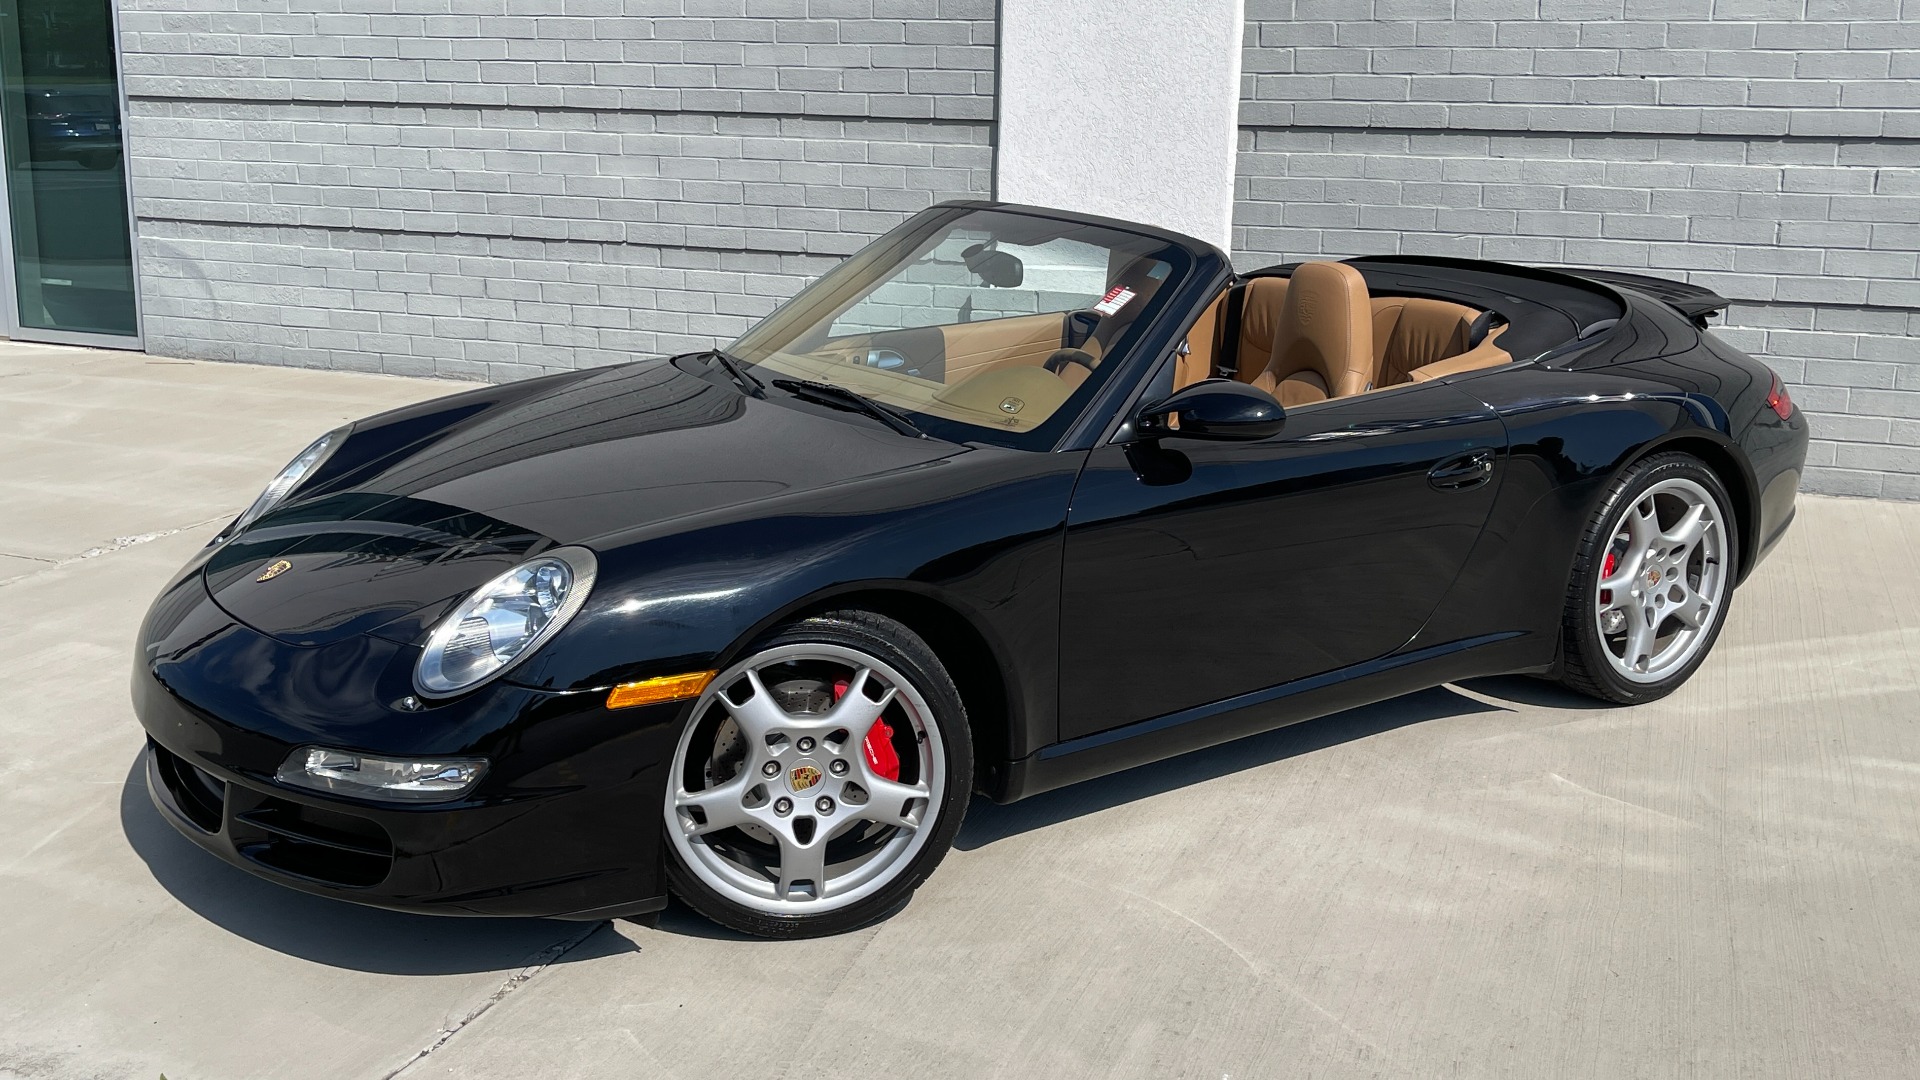 Used 2006 Porsche 911 CARRERA S CABRIOLET / BOSE / CD CHANGER / PWR SEAT PKG / HTD STS for sale $56,400 at Formula Imports in Charlotte NC 28227 8